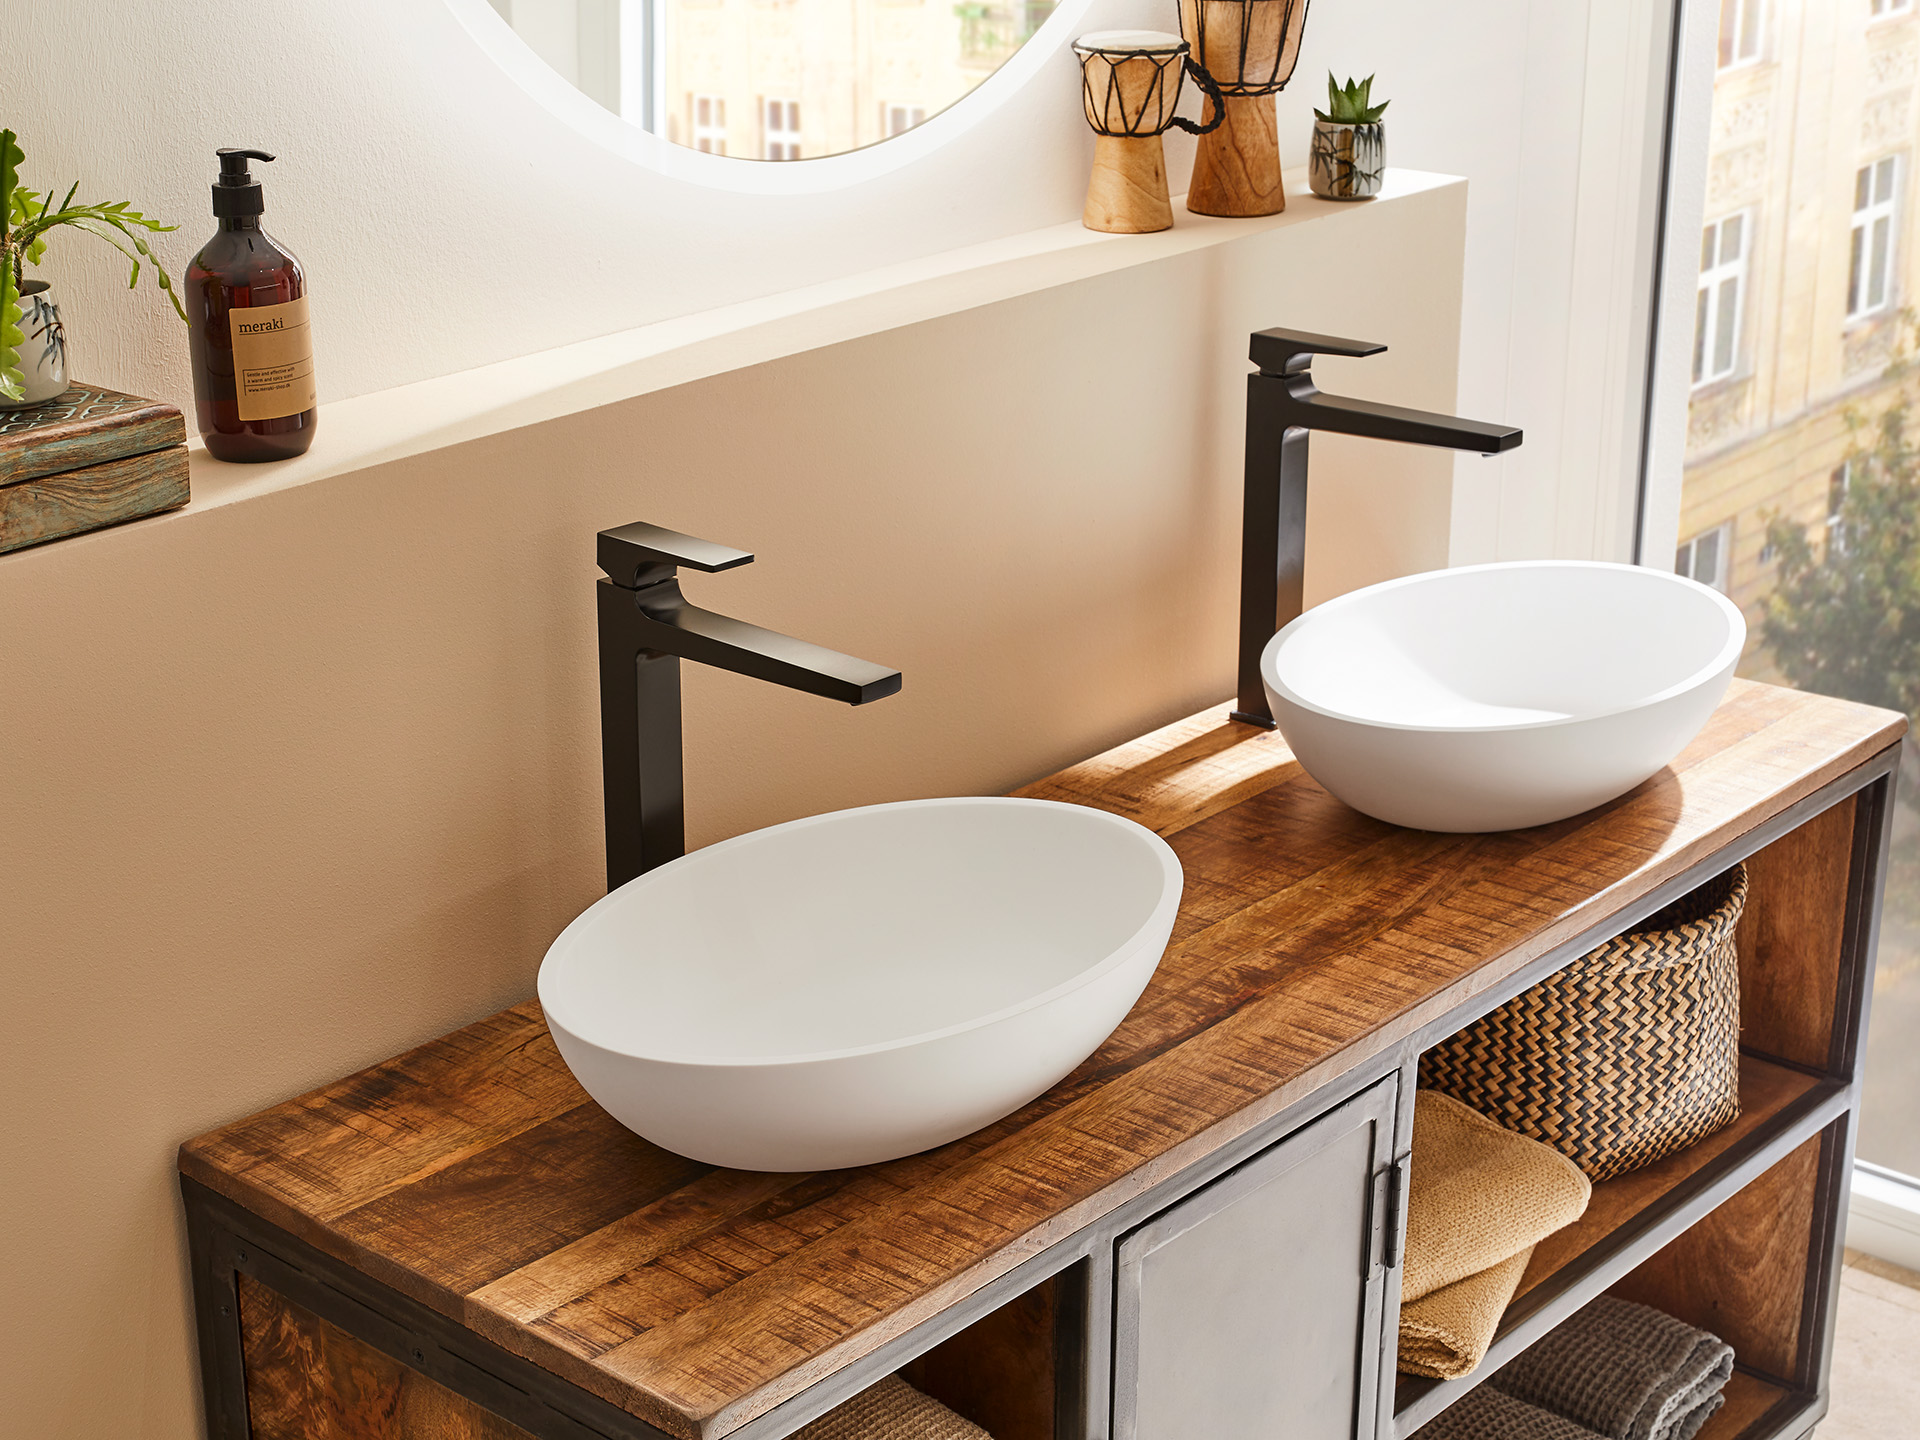 Double sinks and bathroom furnishings for couples: How to multiply your happines...